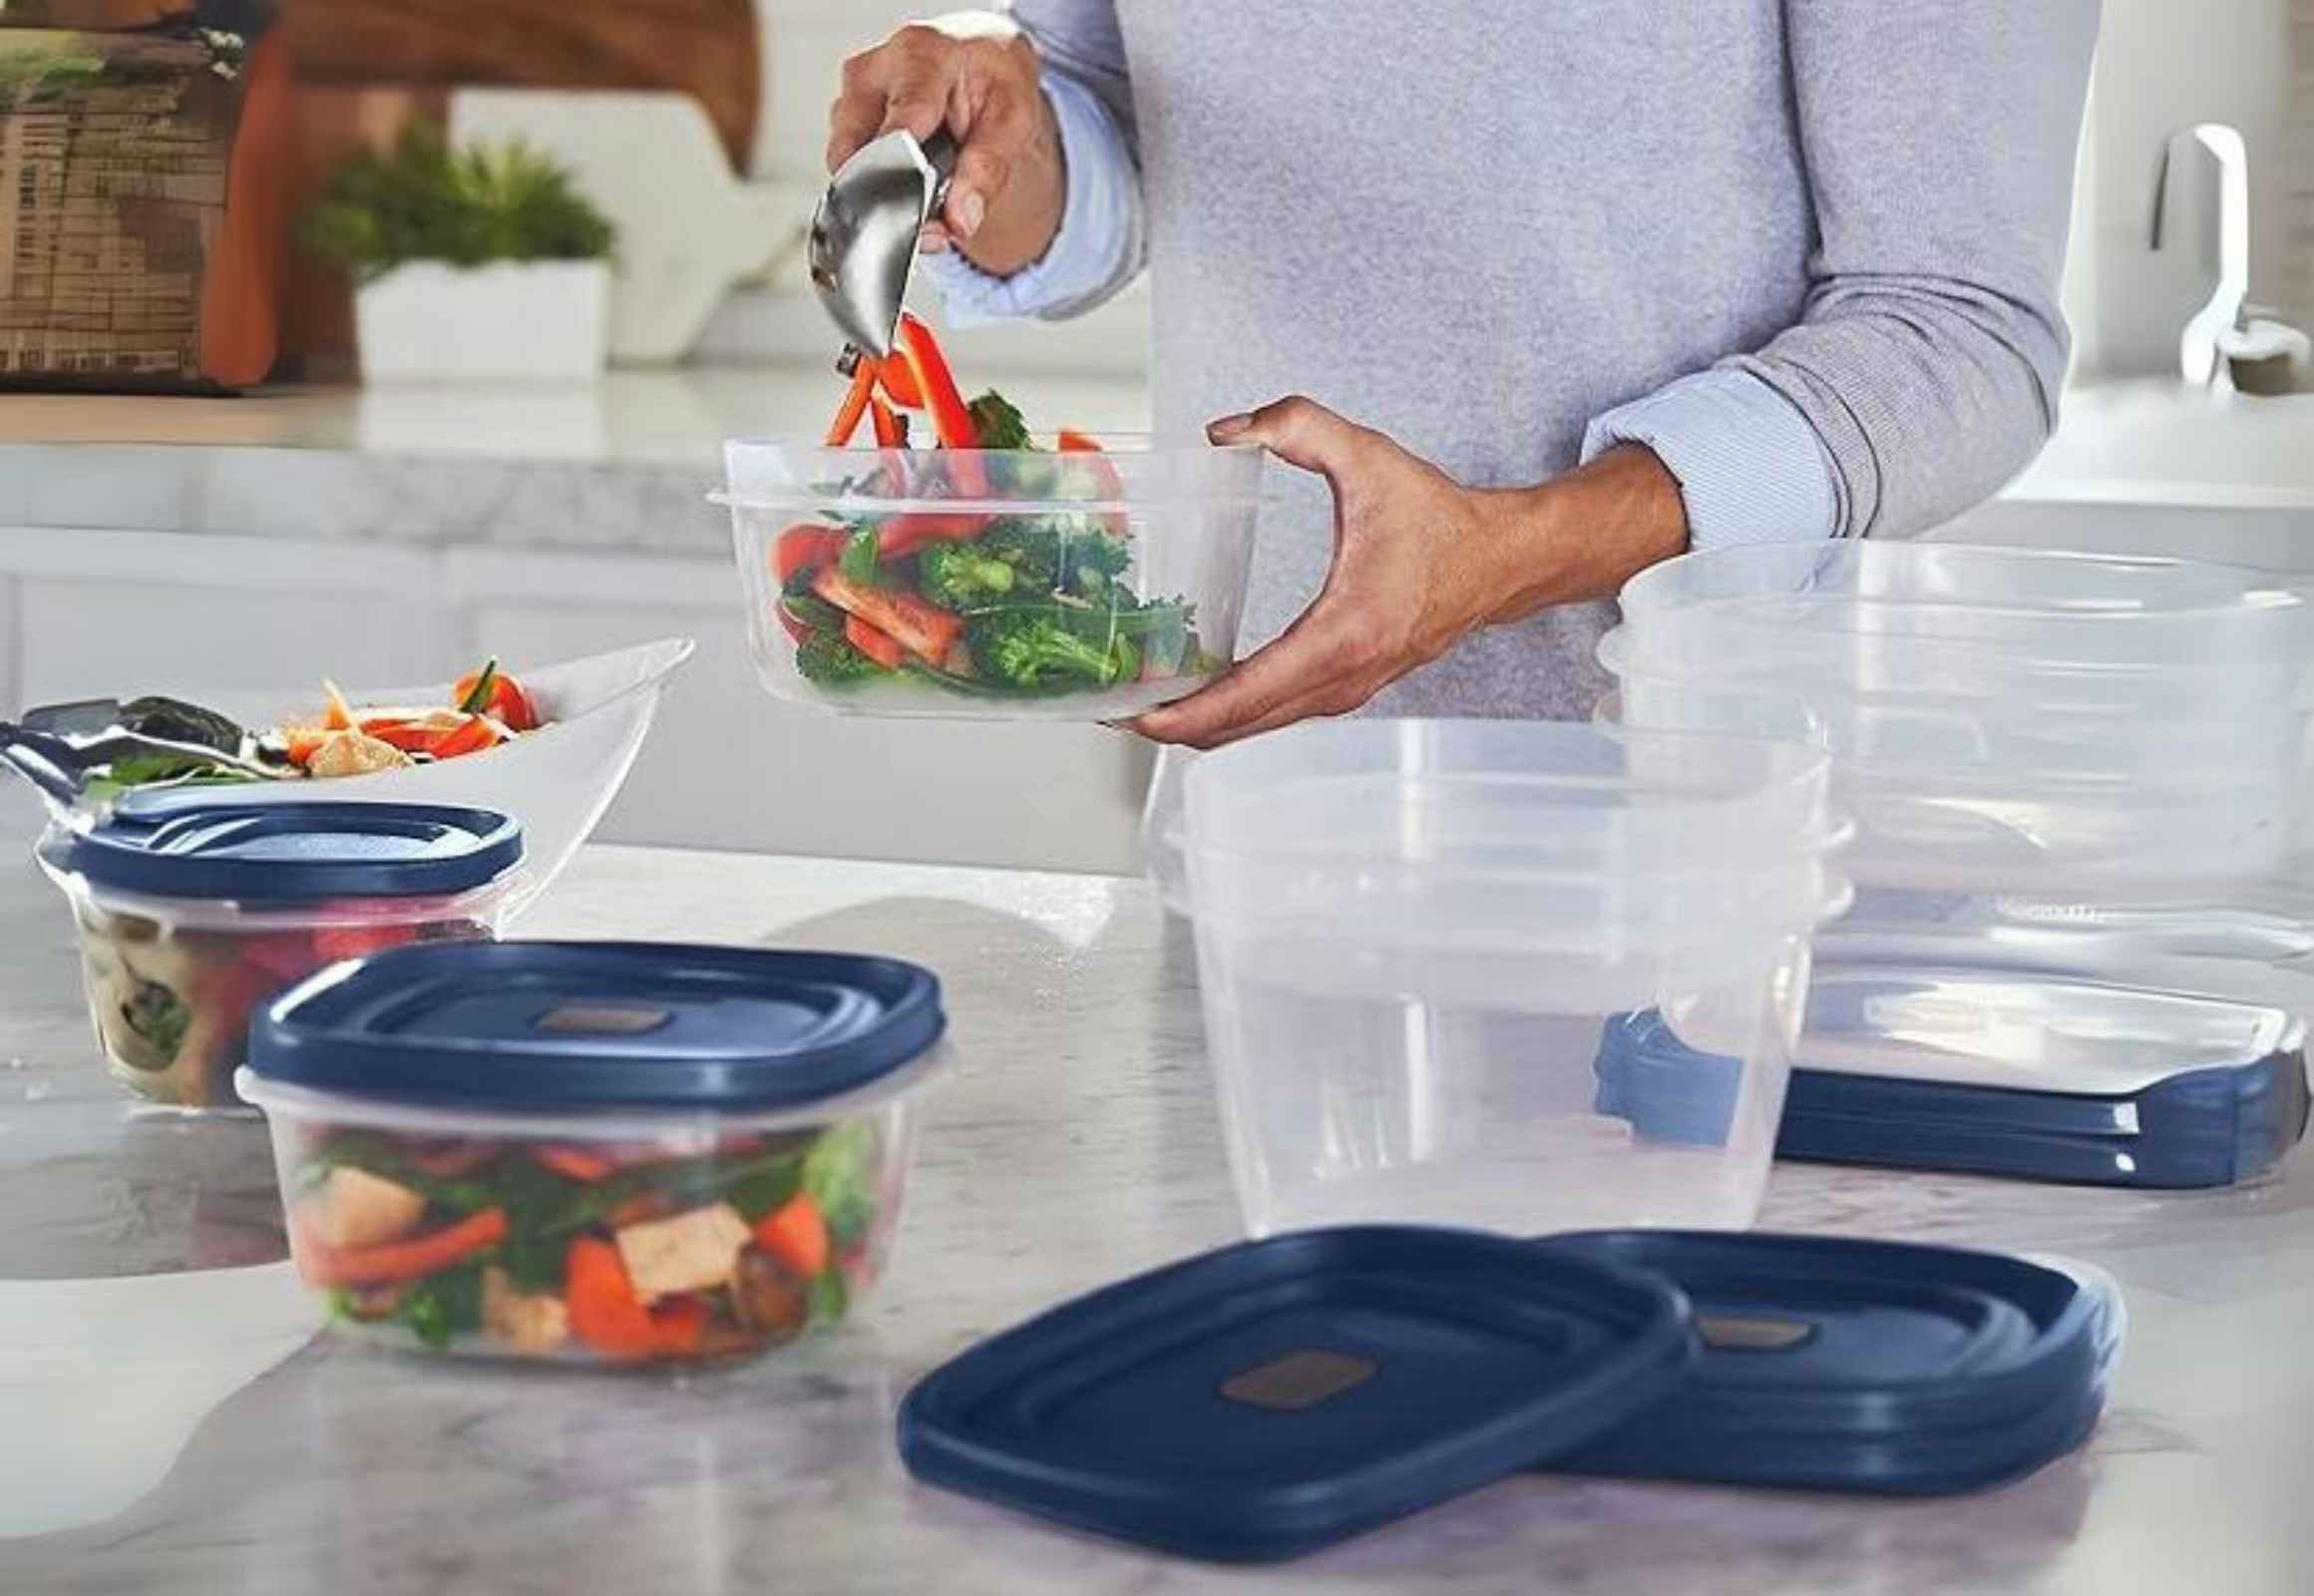 Rubbermaid Food Storage 42-Piece Set, Only $24.99 on Amazon